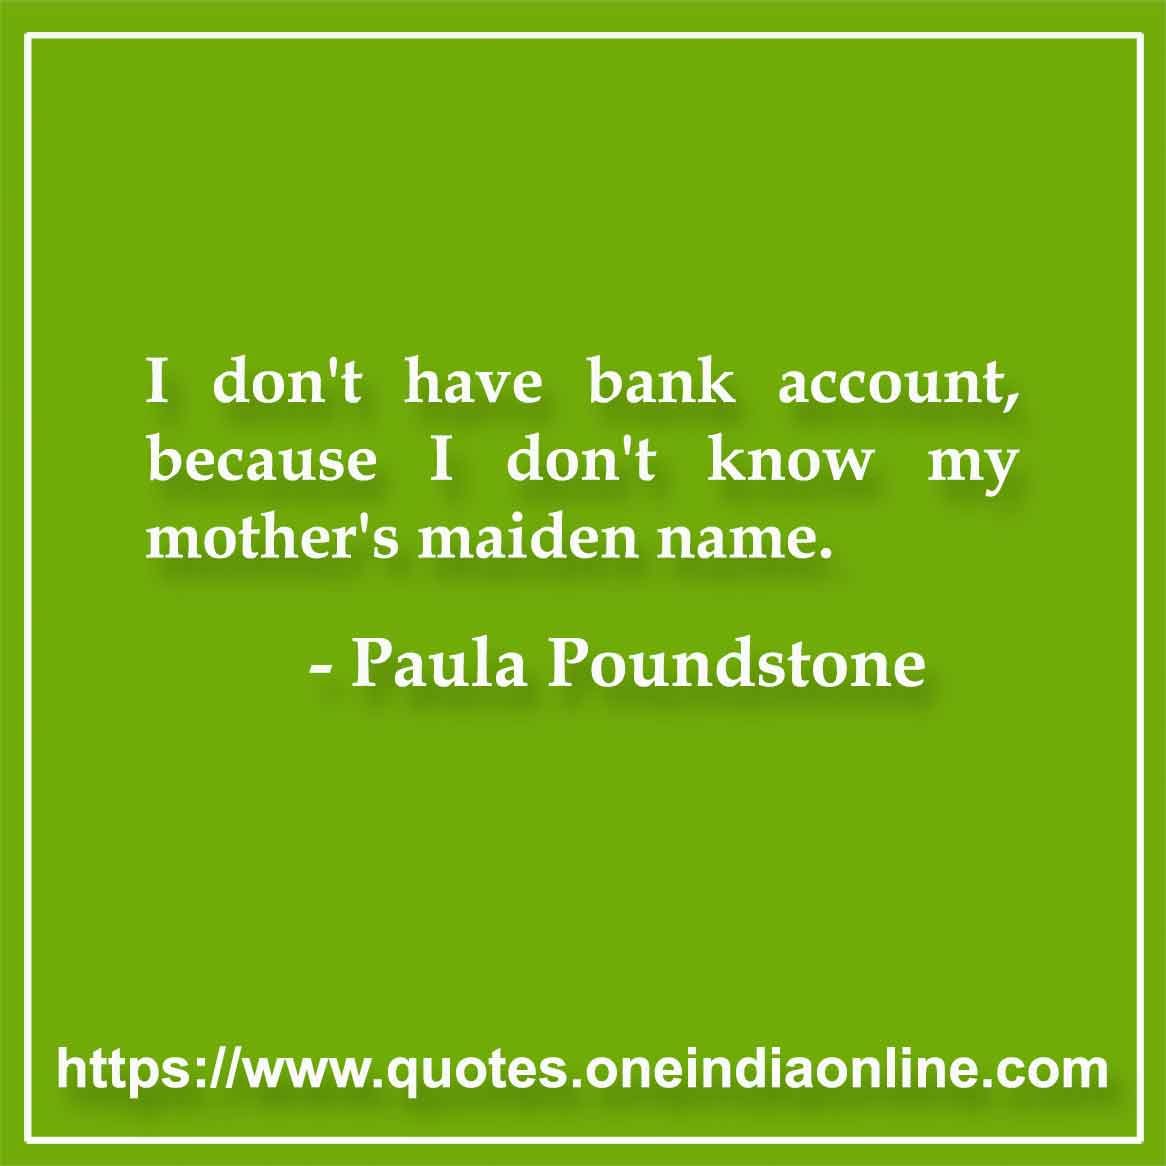 I don't have bank account, because I don't know my mother's maiden name.

- Paula Poundstone Quotes